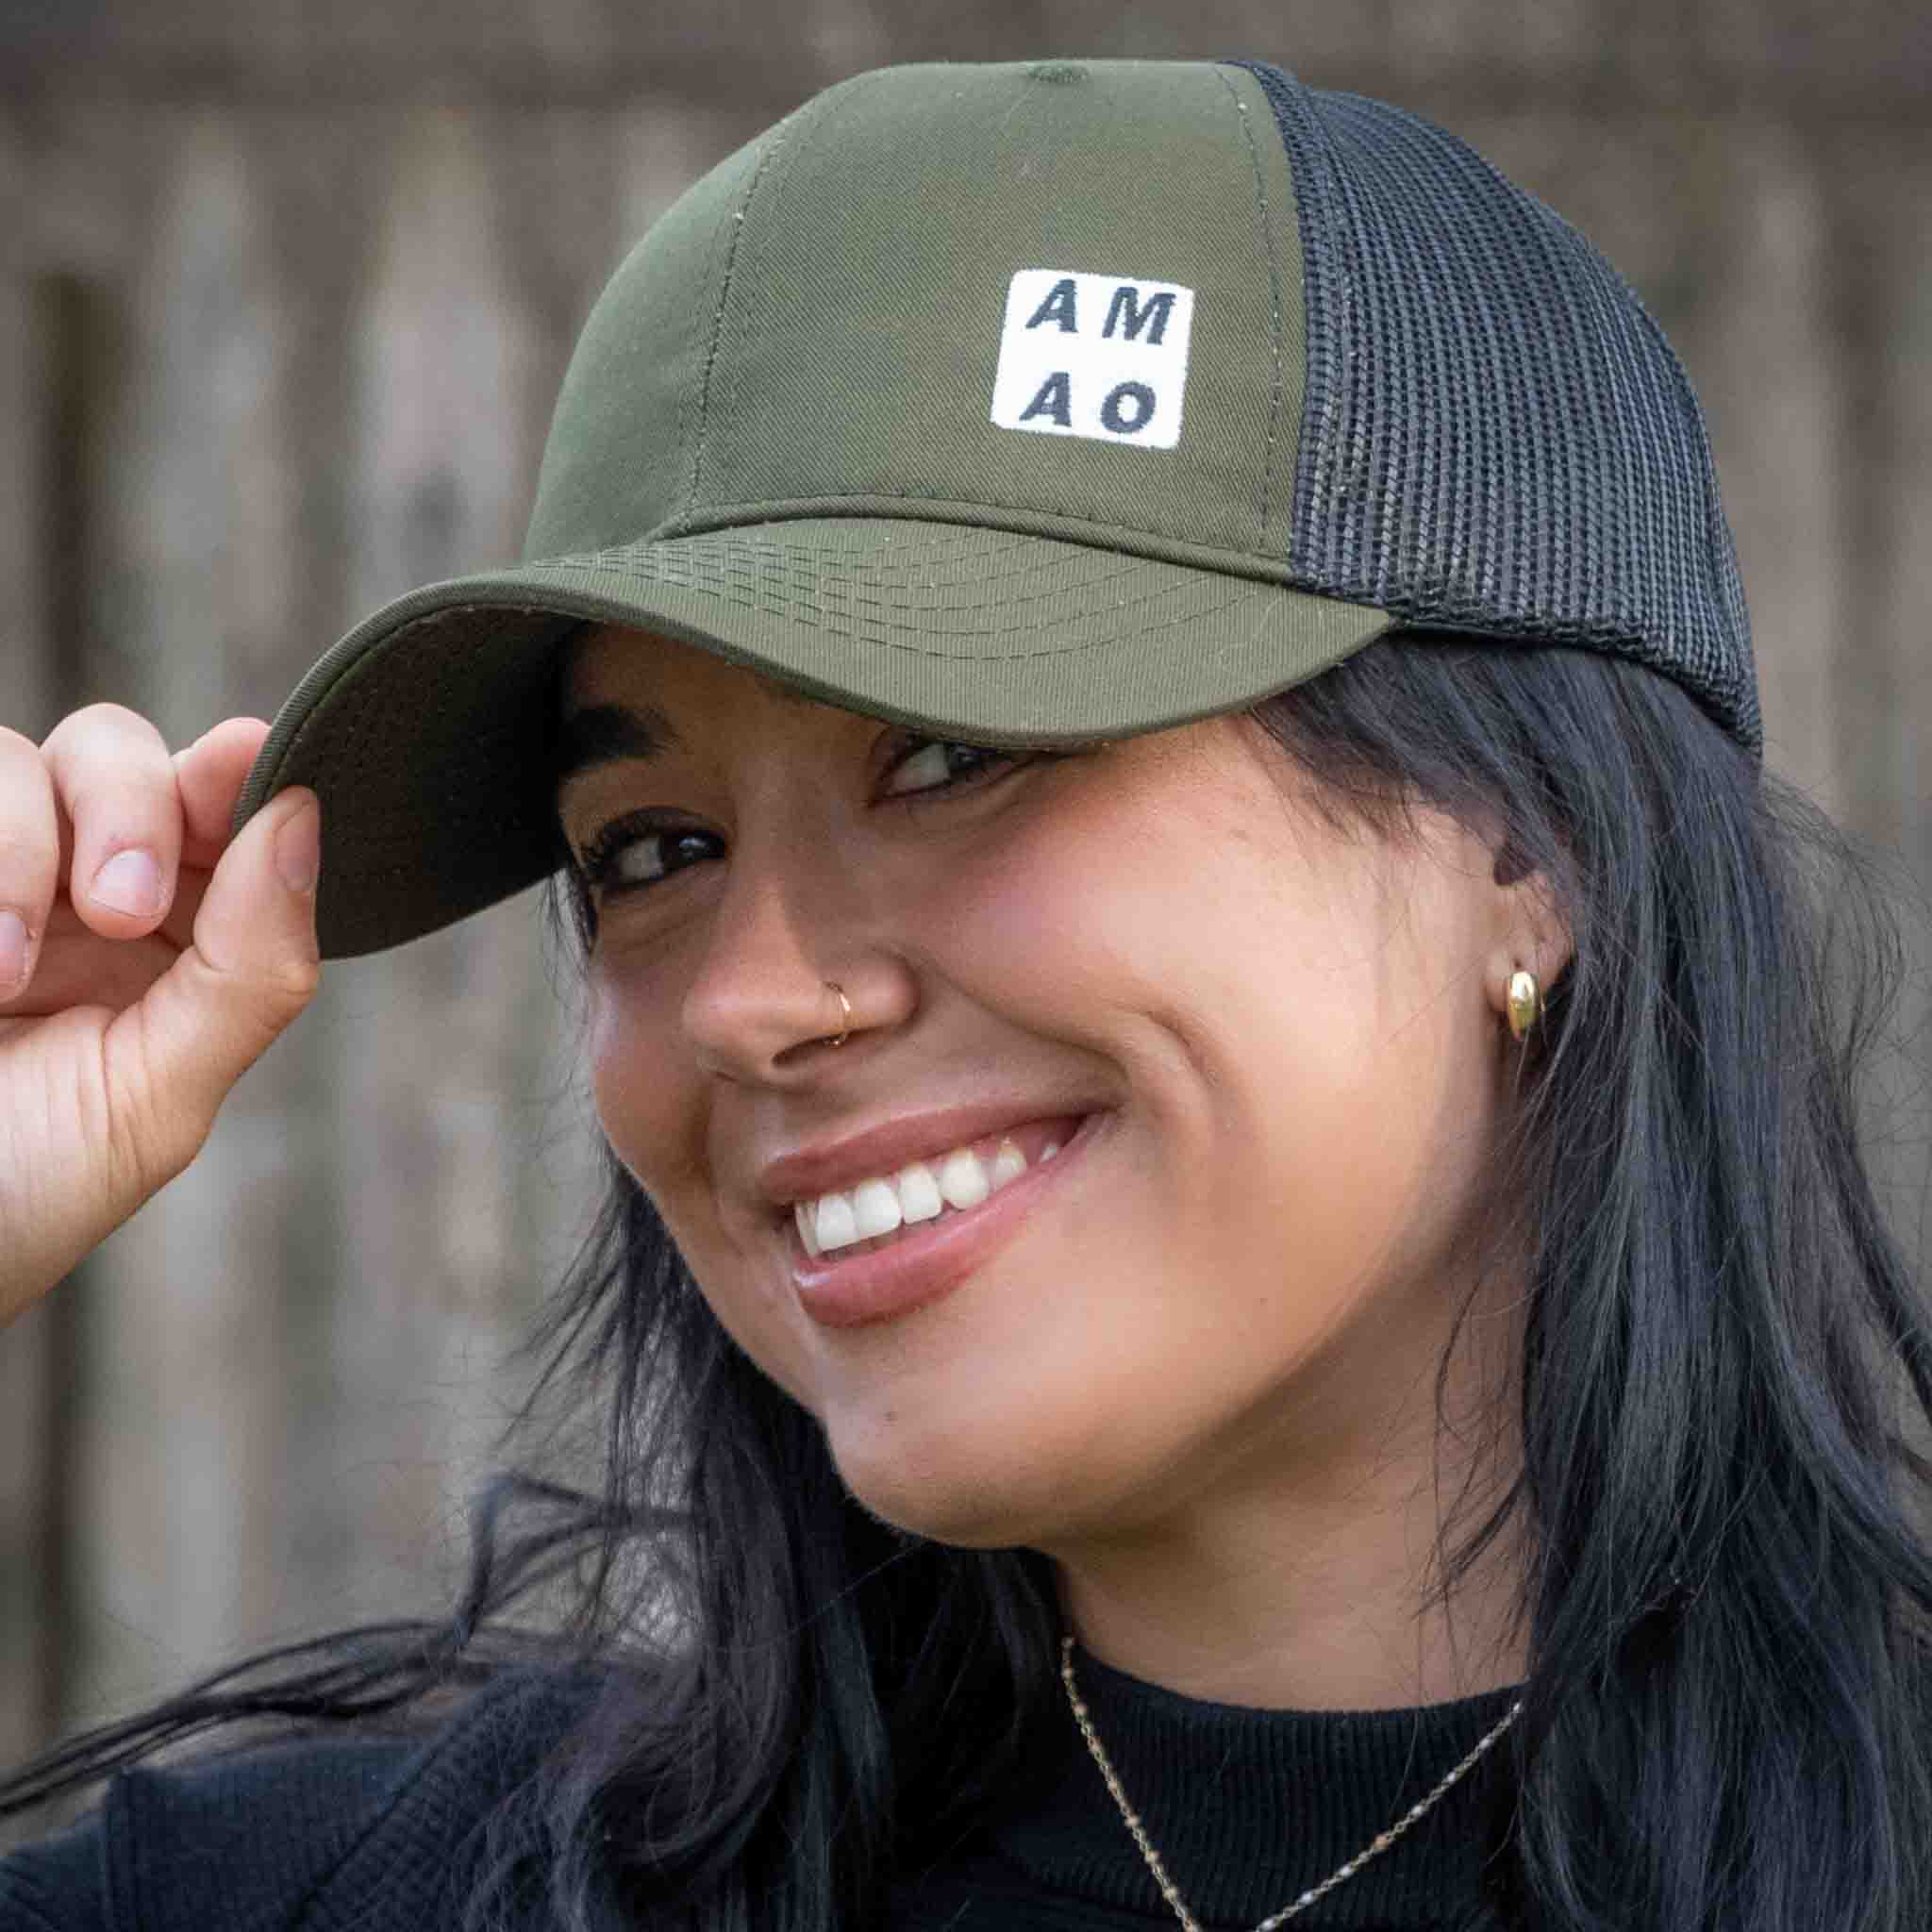 AMAO Trucker Hat - Gals Olive w-Black Mesh - Compare at $69